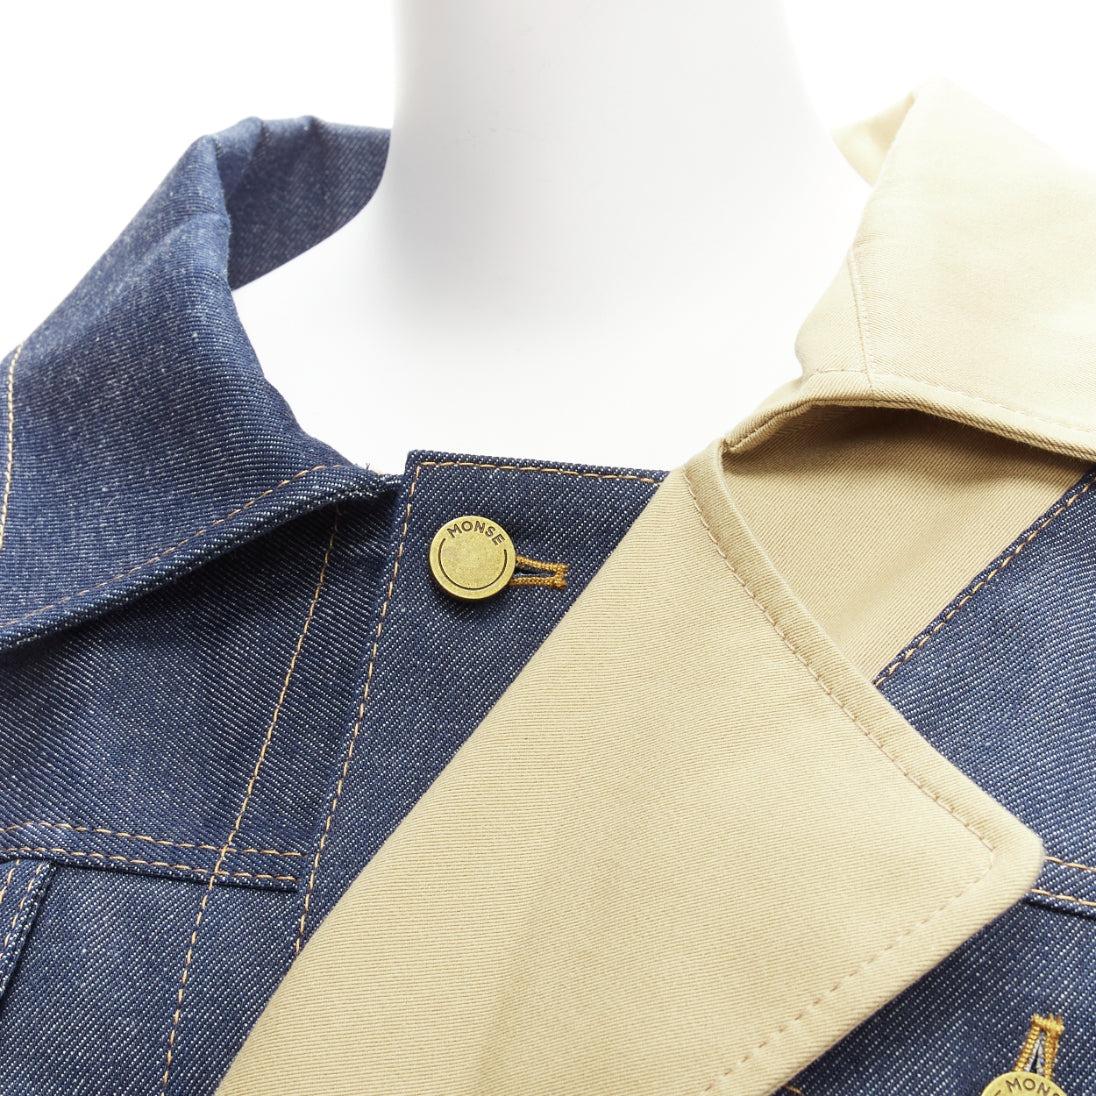 MONSE blue khaki cotton denim deconstructed trench jacket XS
Reference: NKLL/A00011
Brand: Monse
Material: Cotton
Color: Khaki, Blue
Pattern: Solid
Closure: Button
Extra Details: Dark blue/beige cotton panelled denim trench jacket from MONSE